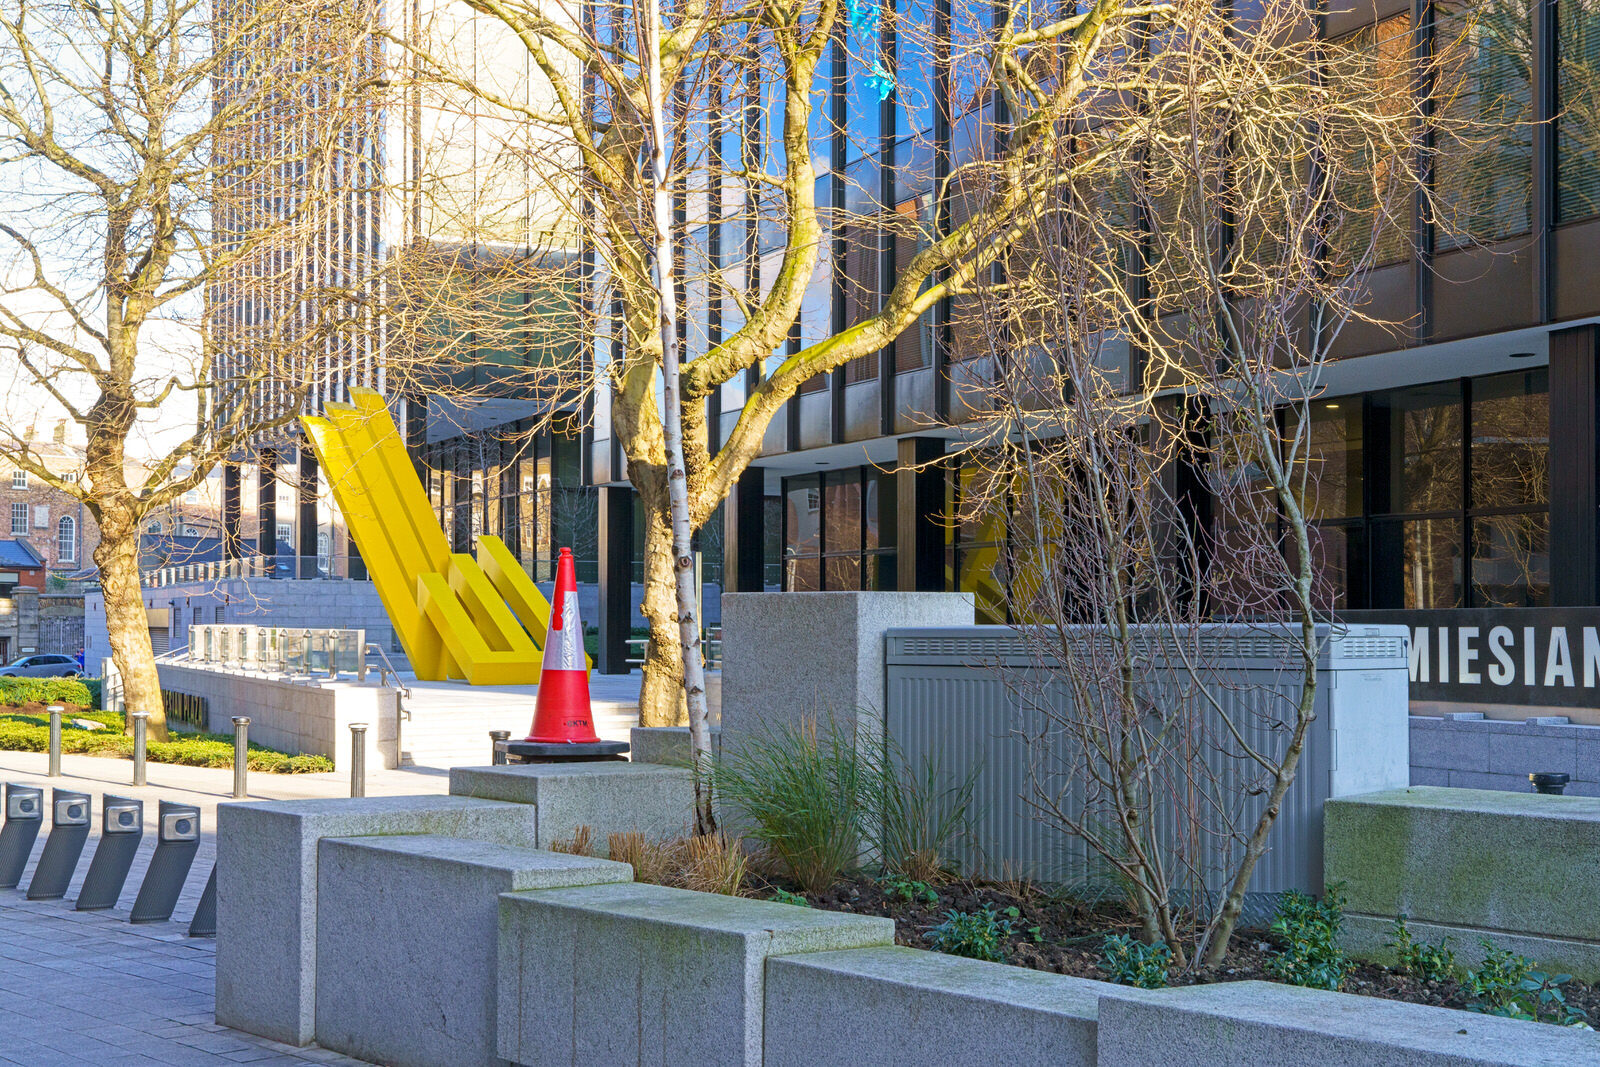 SCULPTURE BY MICHAEL BULFIN AT MIESIAN PLAZA [YELLOW STEEL GEOMETRIC REFLECTIONS]-227857-1